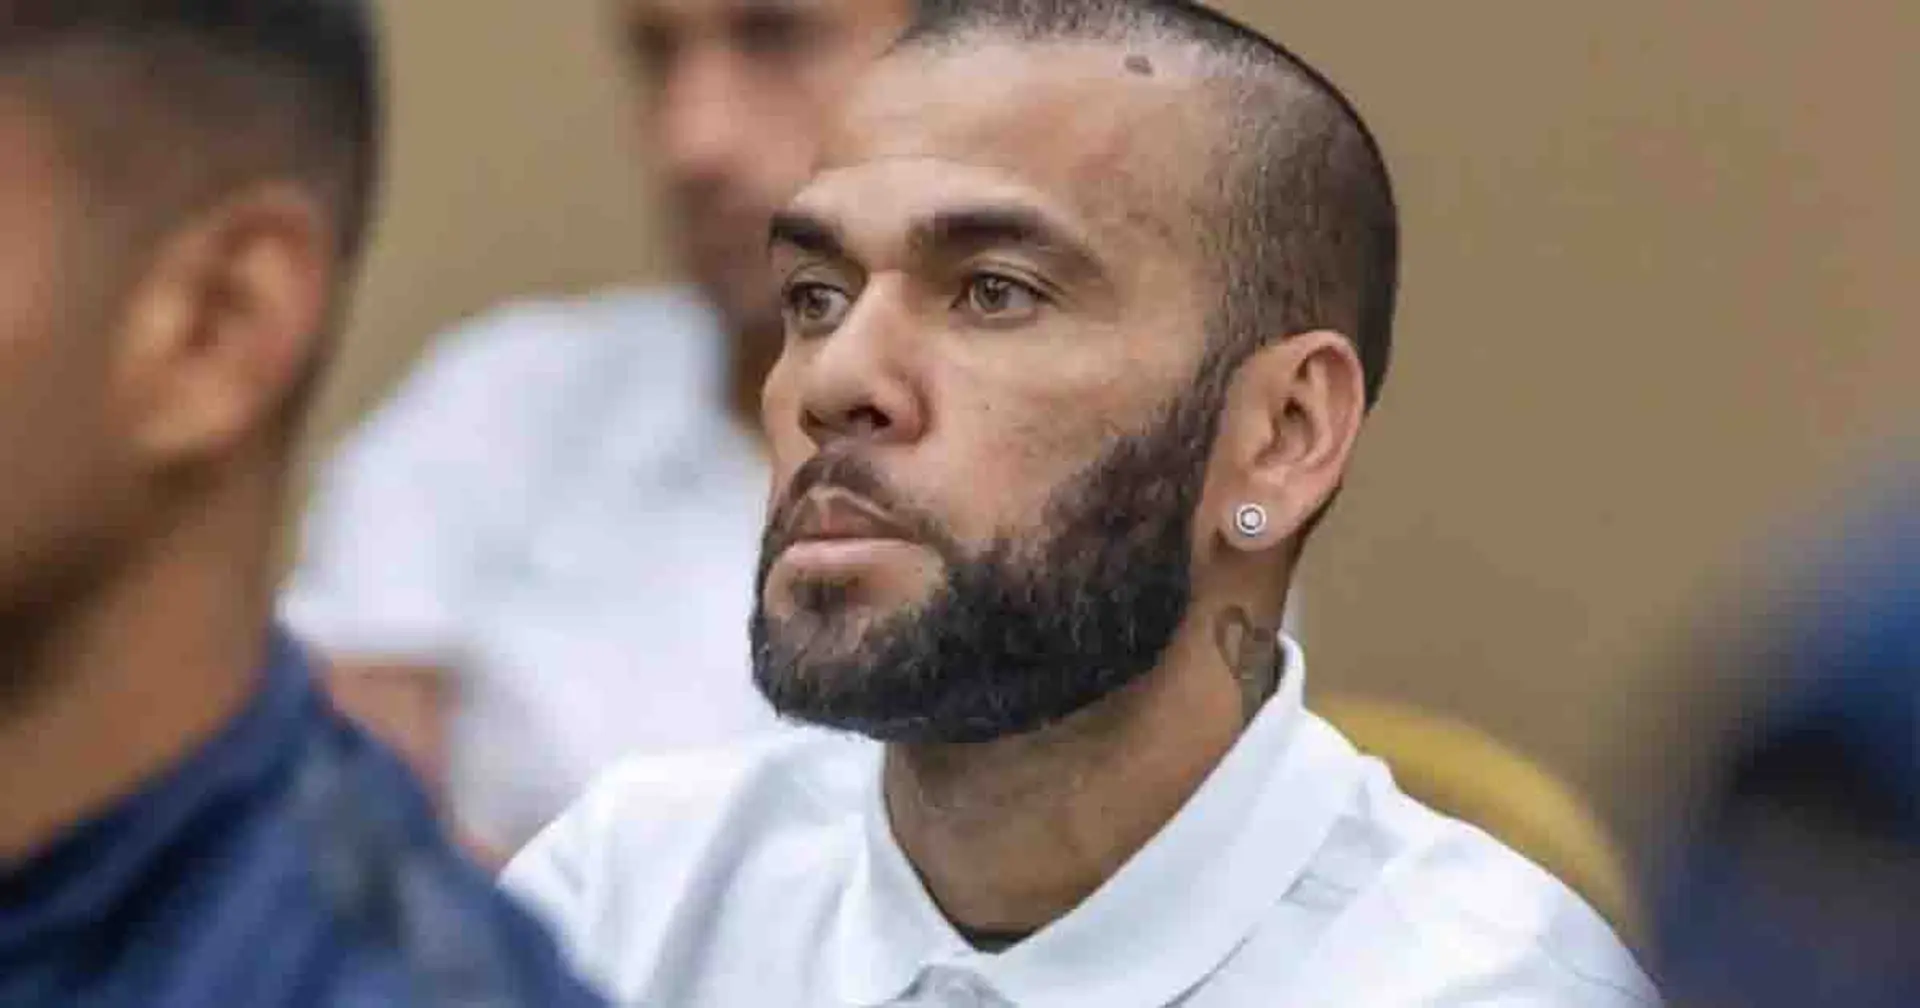 Dani Alves given four-and-half year prison sentence for alleged sexual assault